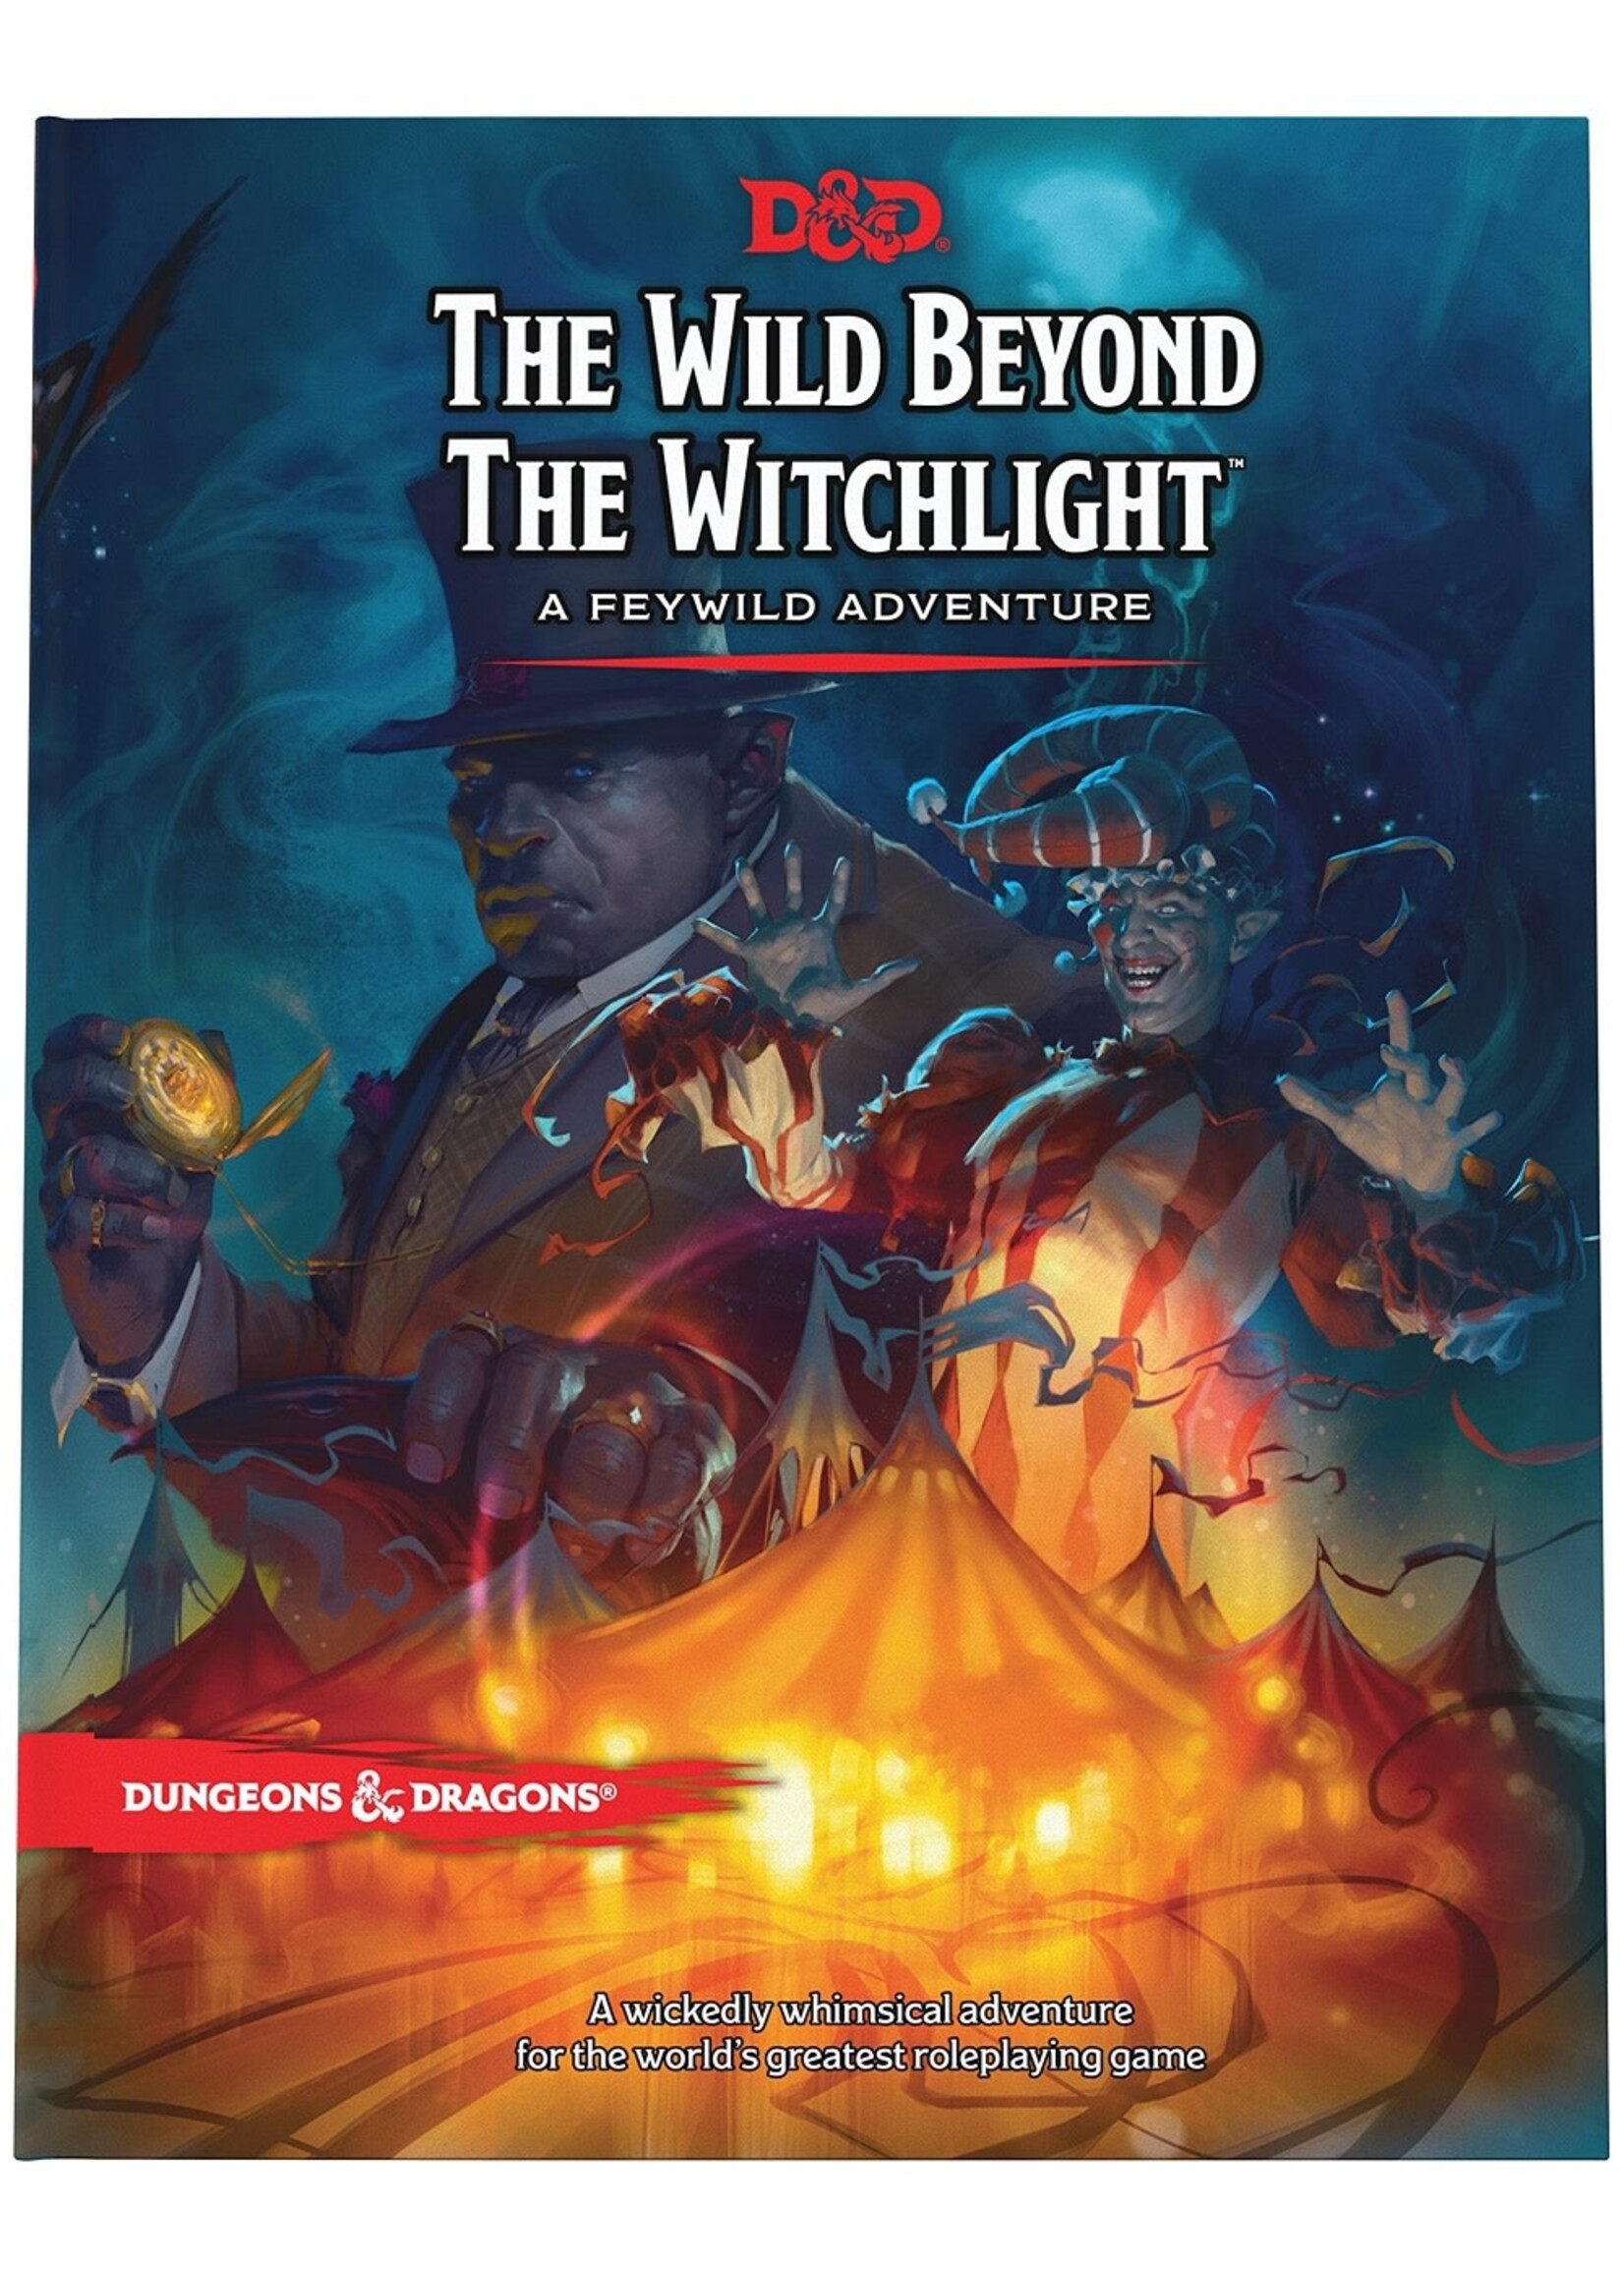 The Wild Beyond the Witchlight: A Feywild Adventure (Dungeons & Dragons, 5th Edition) by WotC